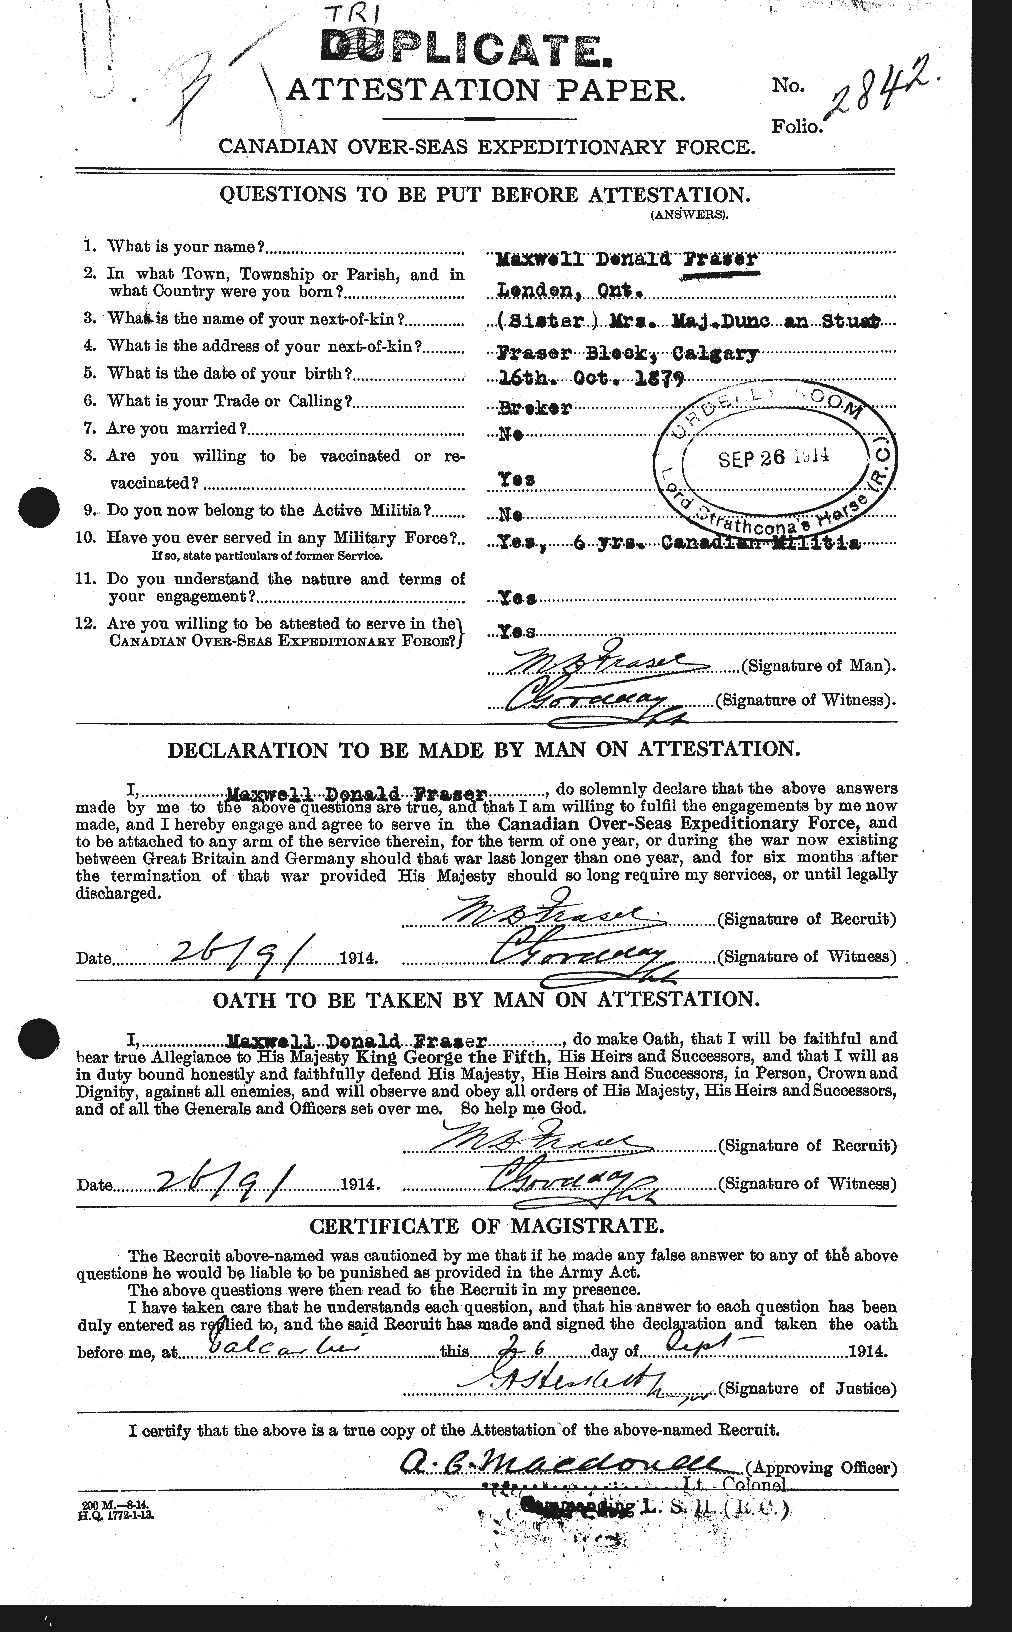 Personnel Records of the First World War - CEF 335566a